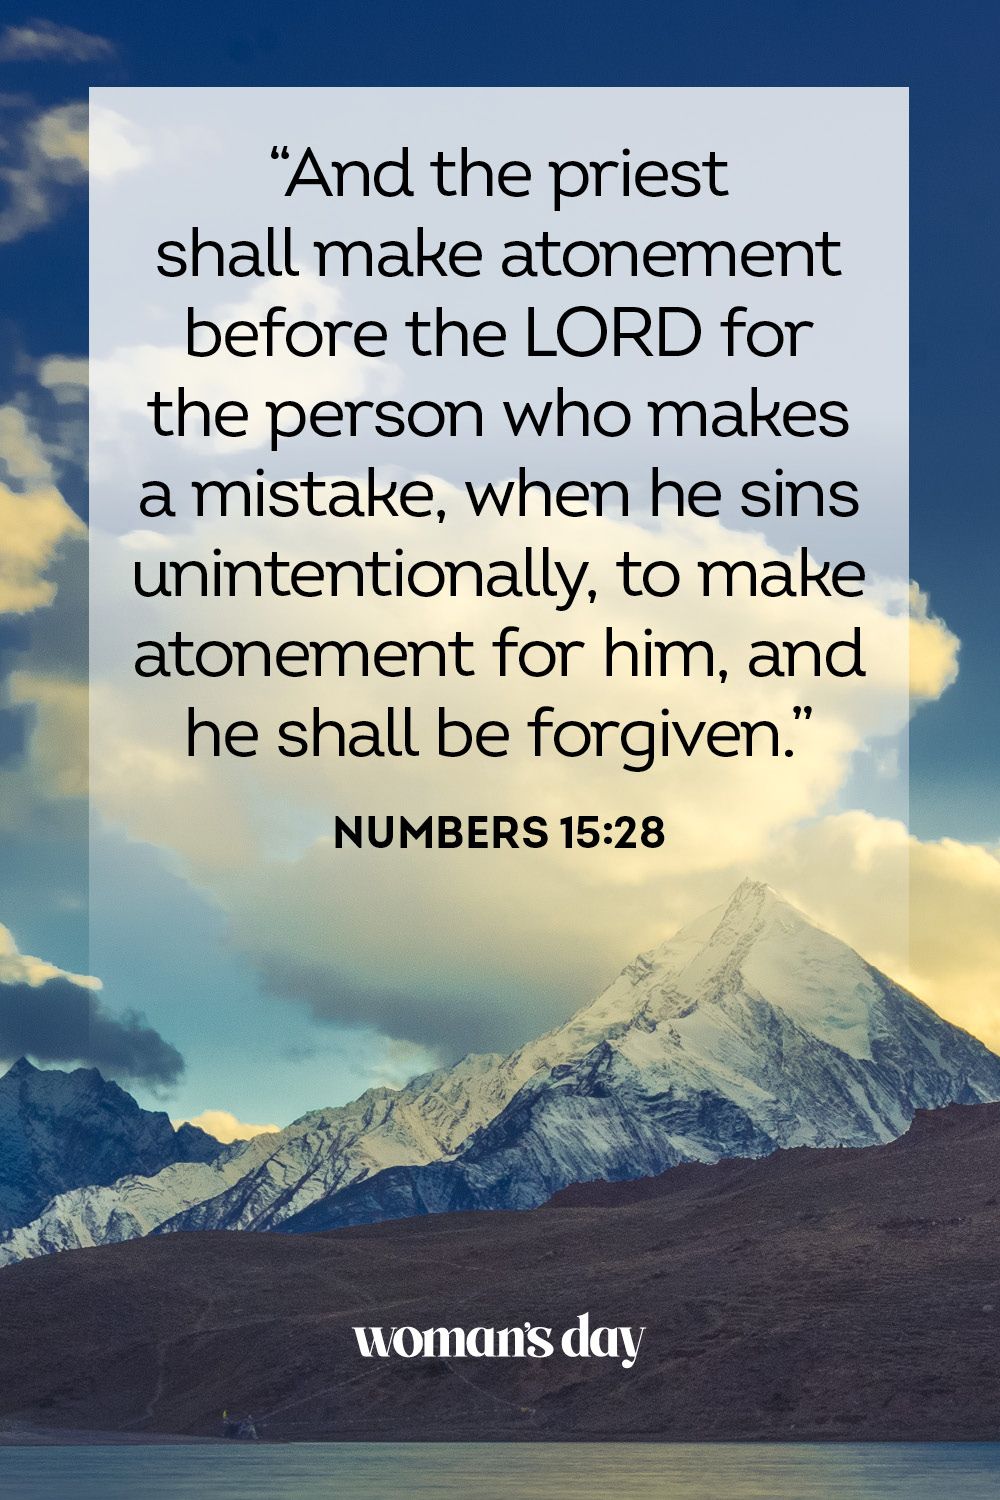 god forgiveness quotes from the bible